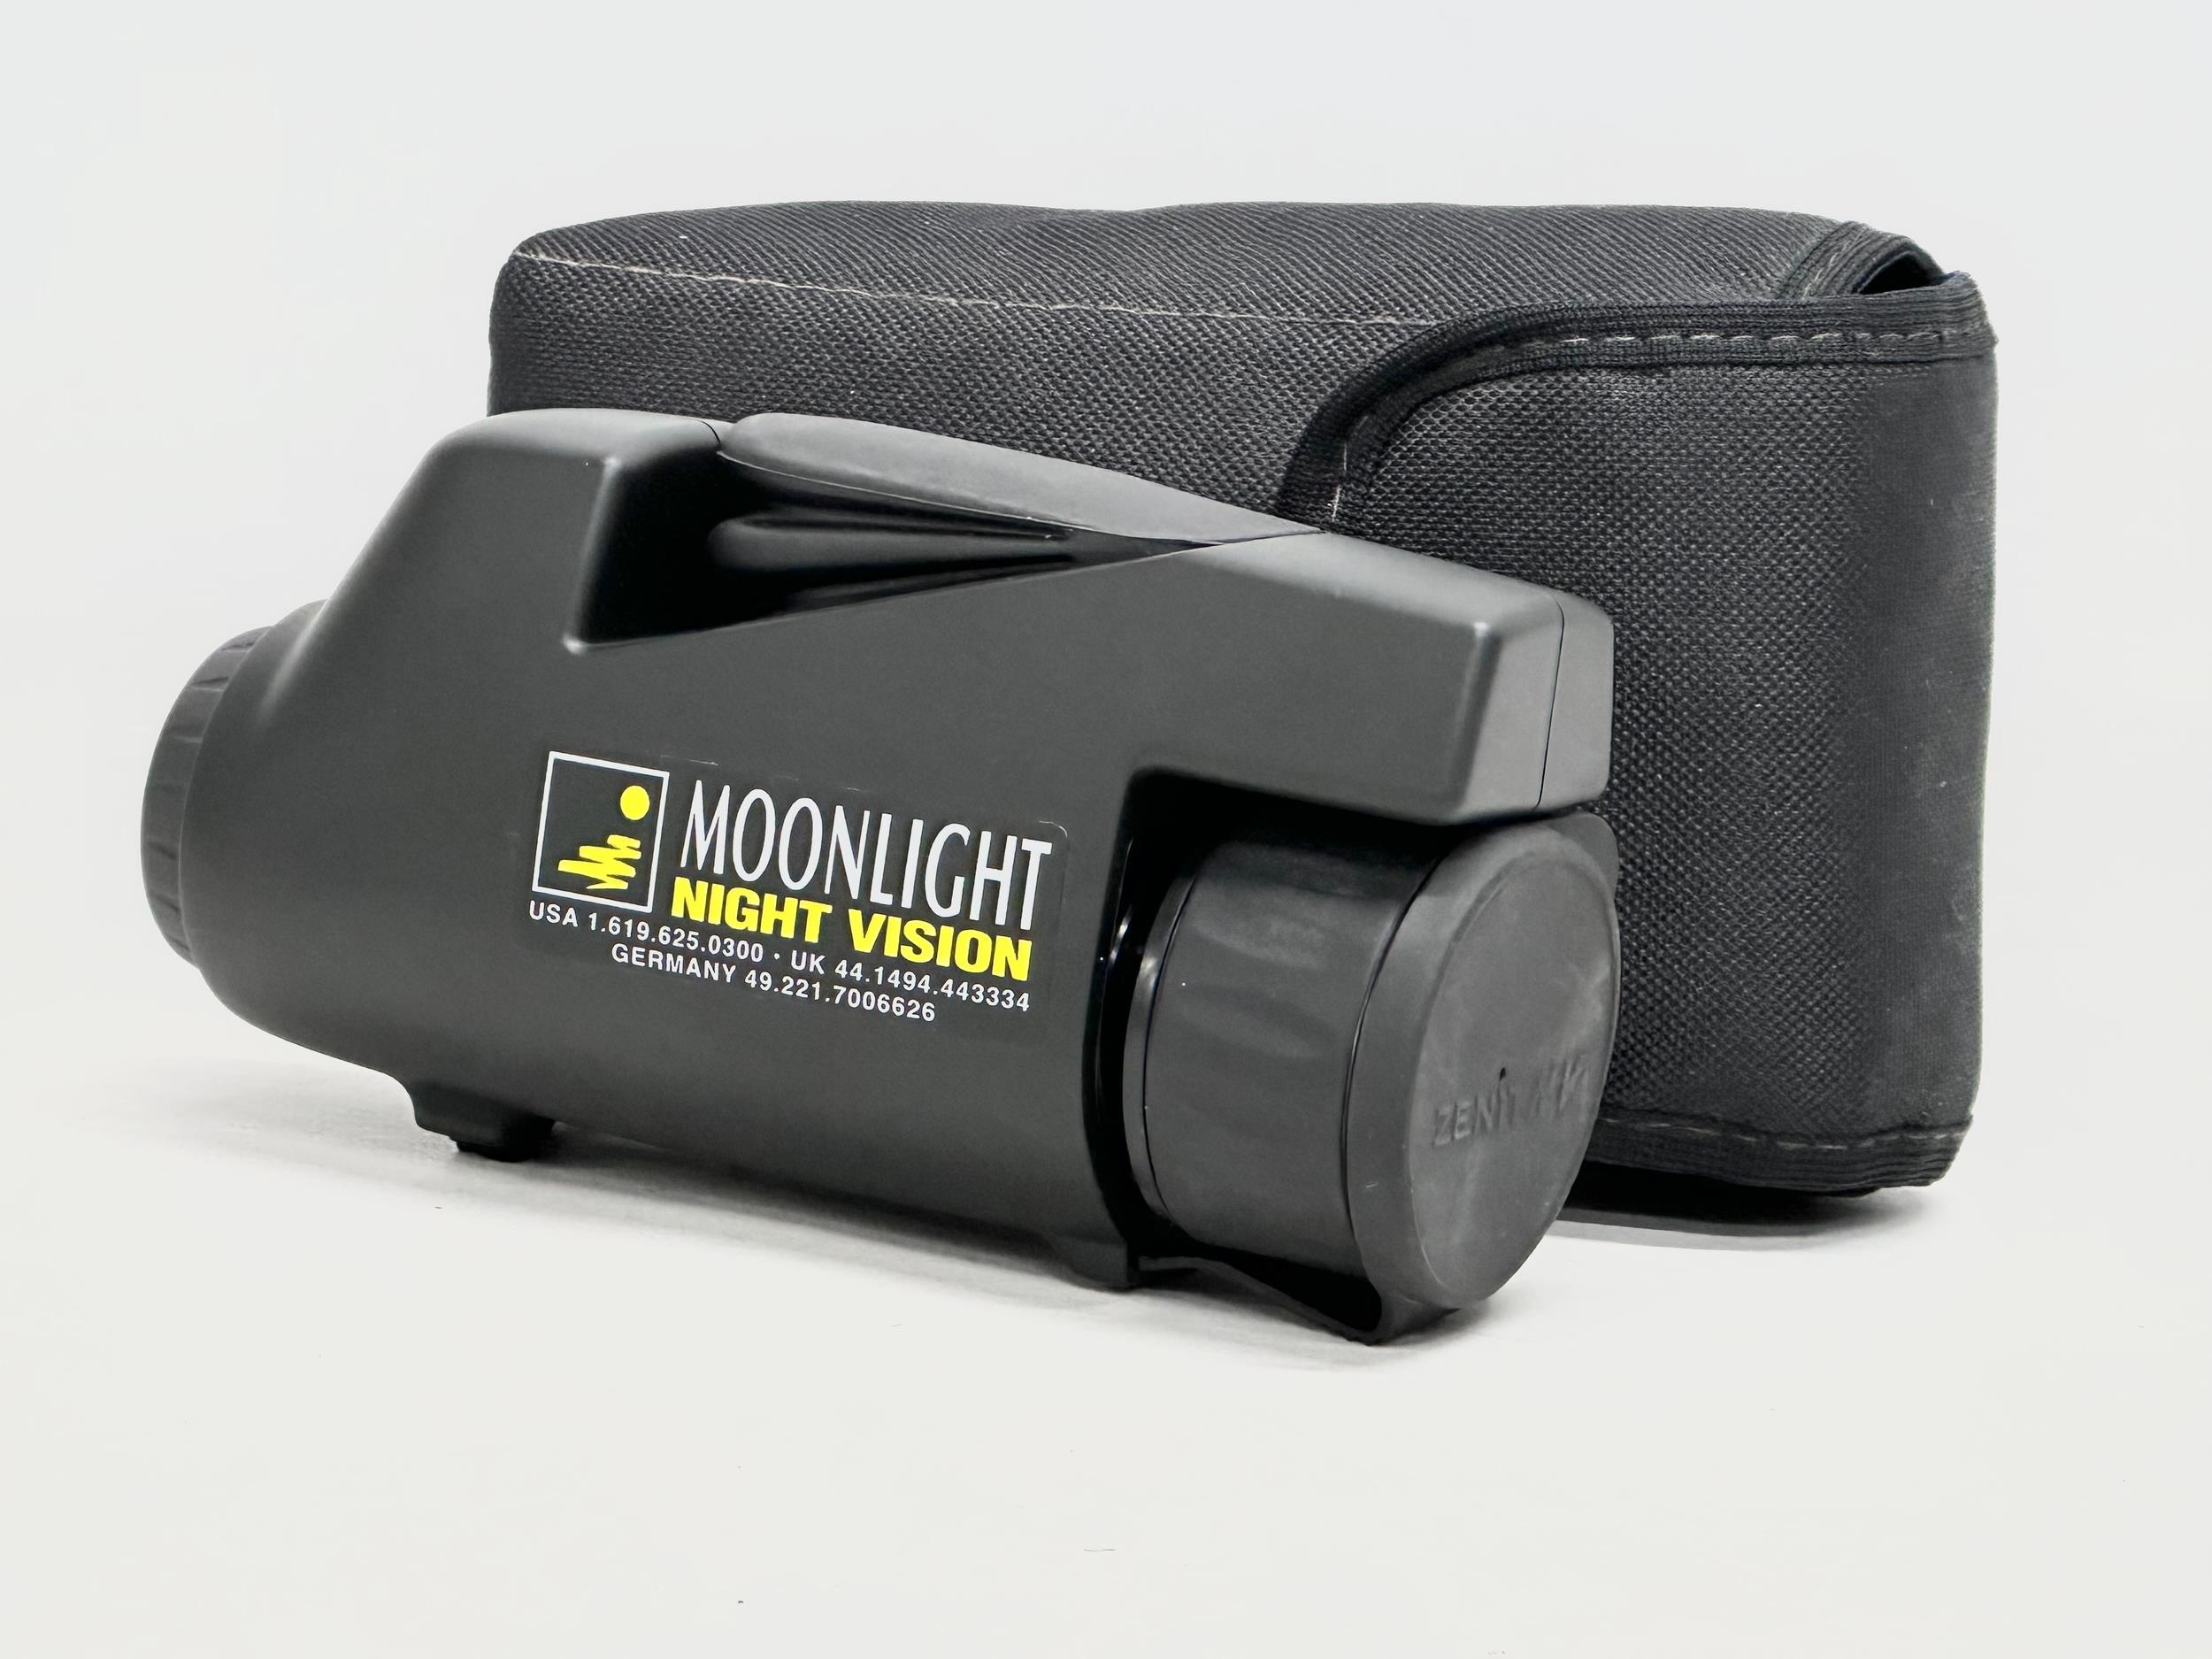 A Zenit NV Moonlight Night Vision scope with case